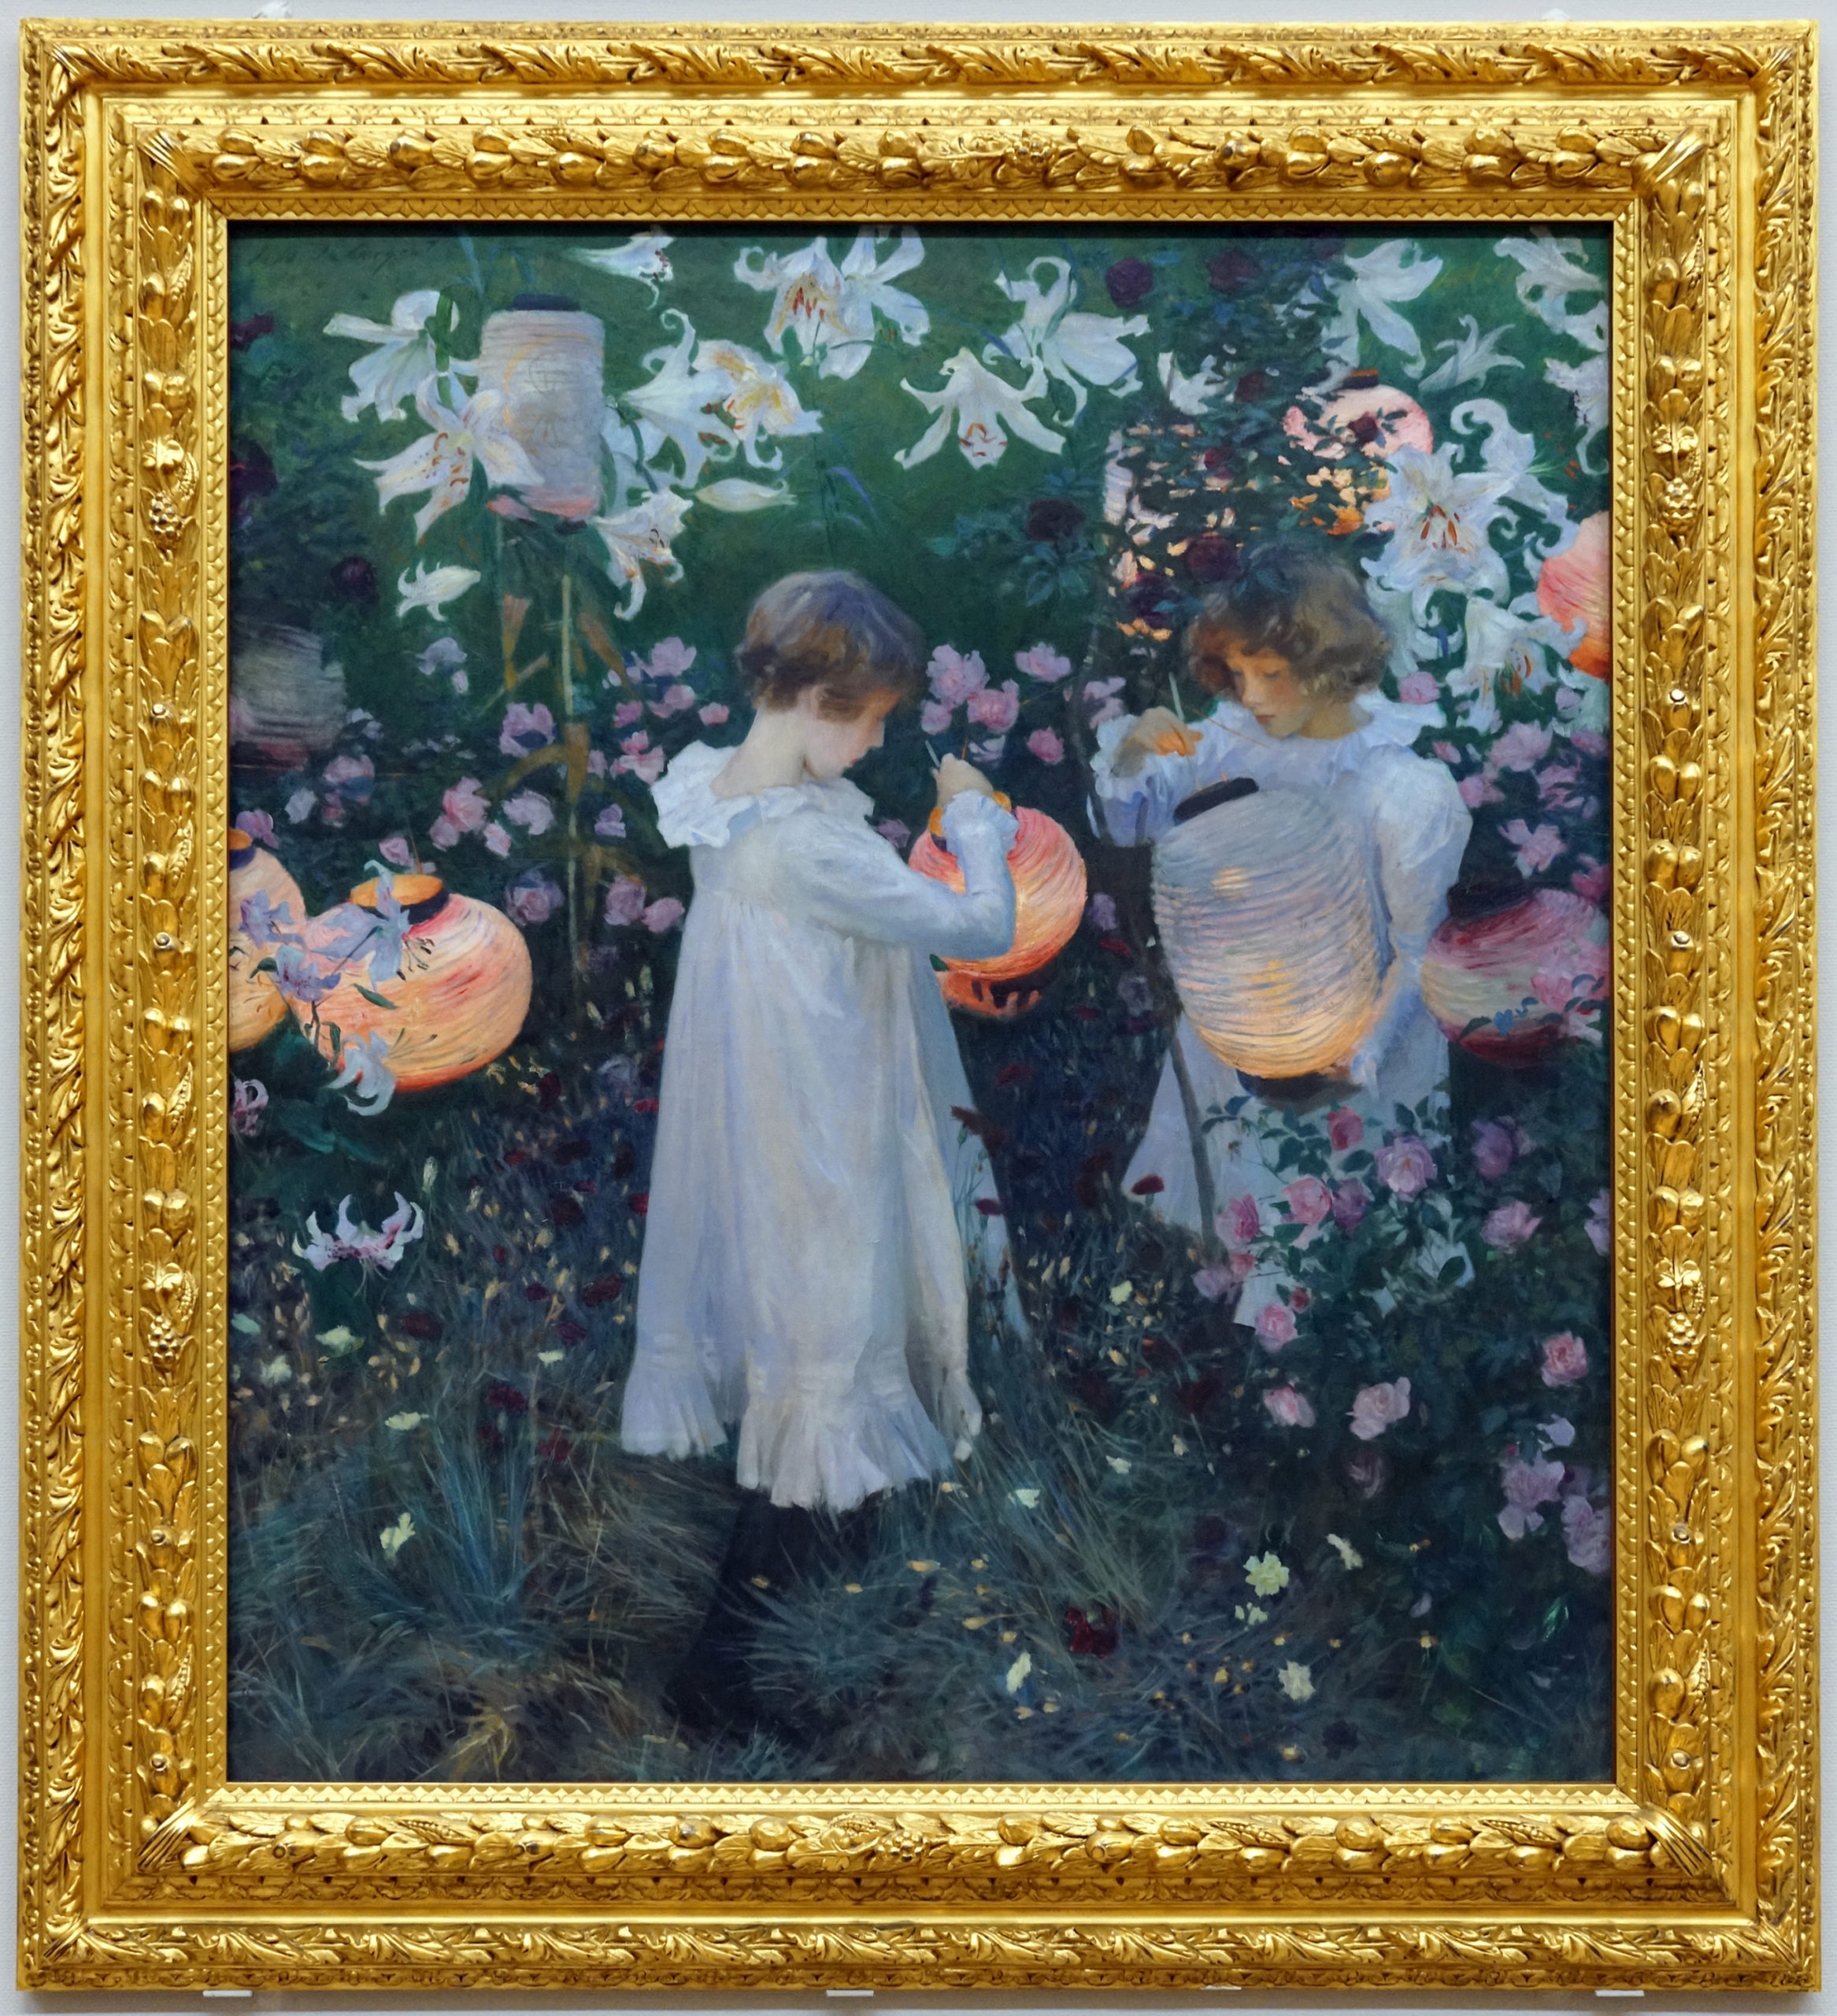 John Singer Sargent, Carnation Lily, Lily, Rose, 1885-86, oil on canvas, 174 x 153.7 cm (Tate Britain)